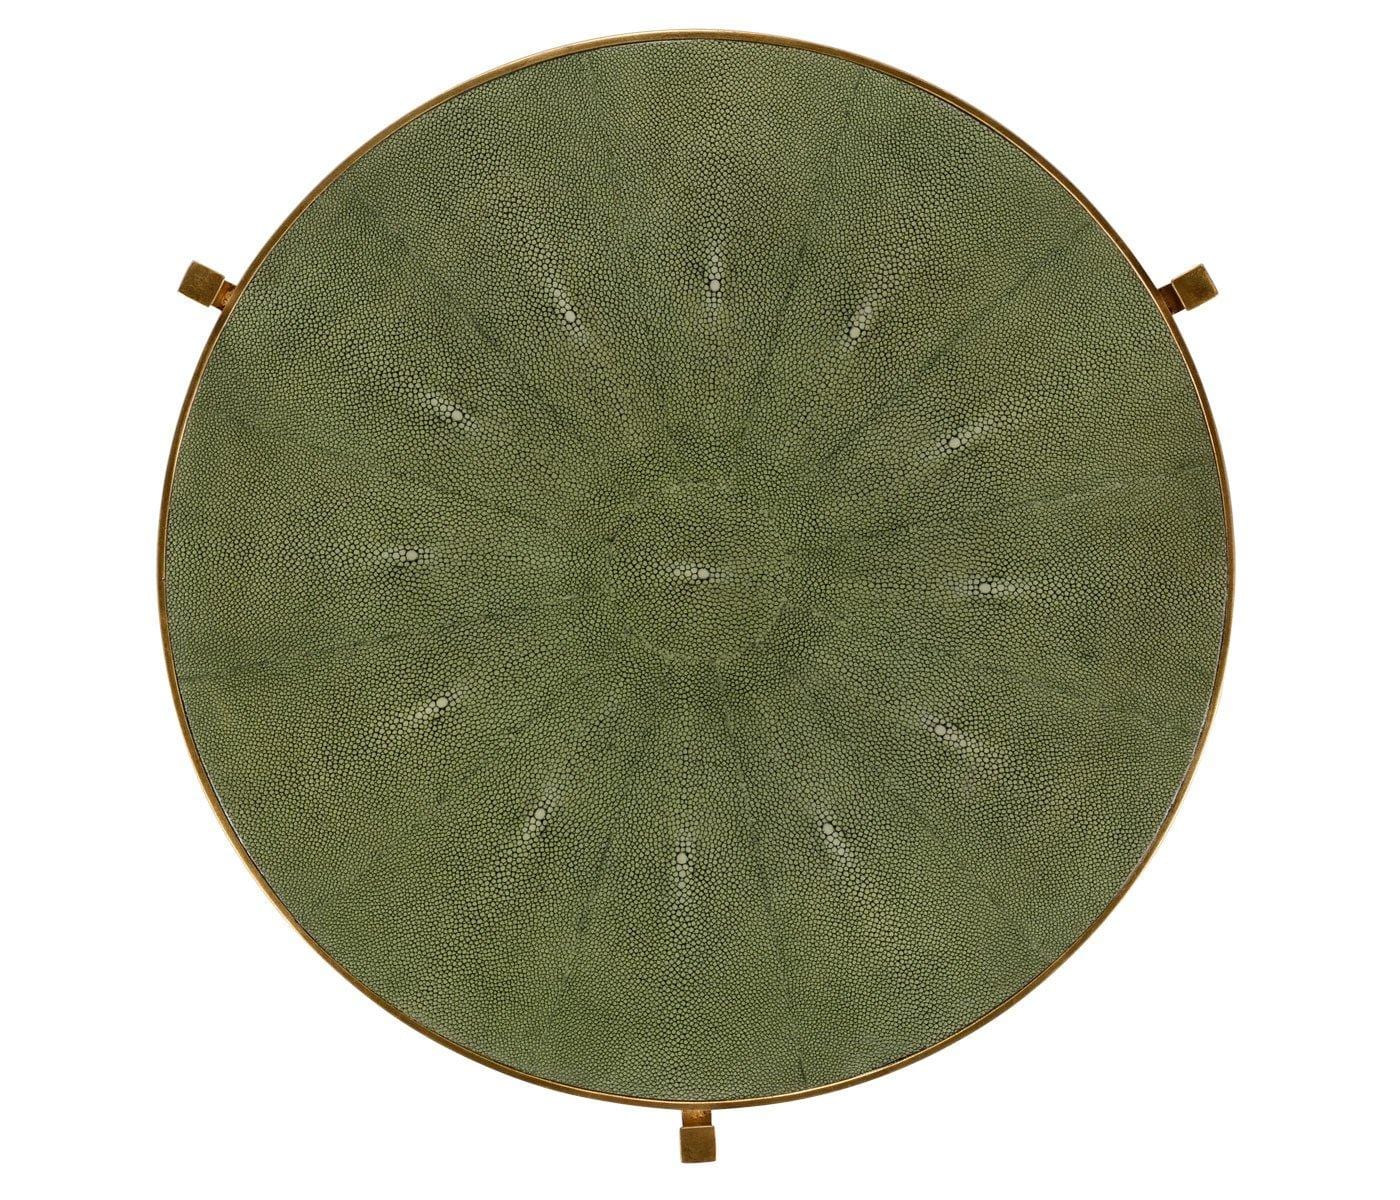 Jonathan Charles Living Jonathan Charles Large Round Lamp Table Contemporary in Green Shagreen - Gilded House of Isabella UK